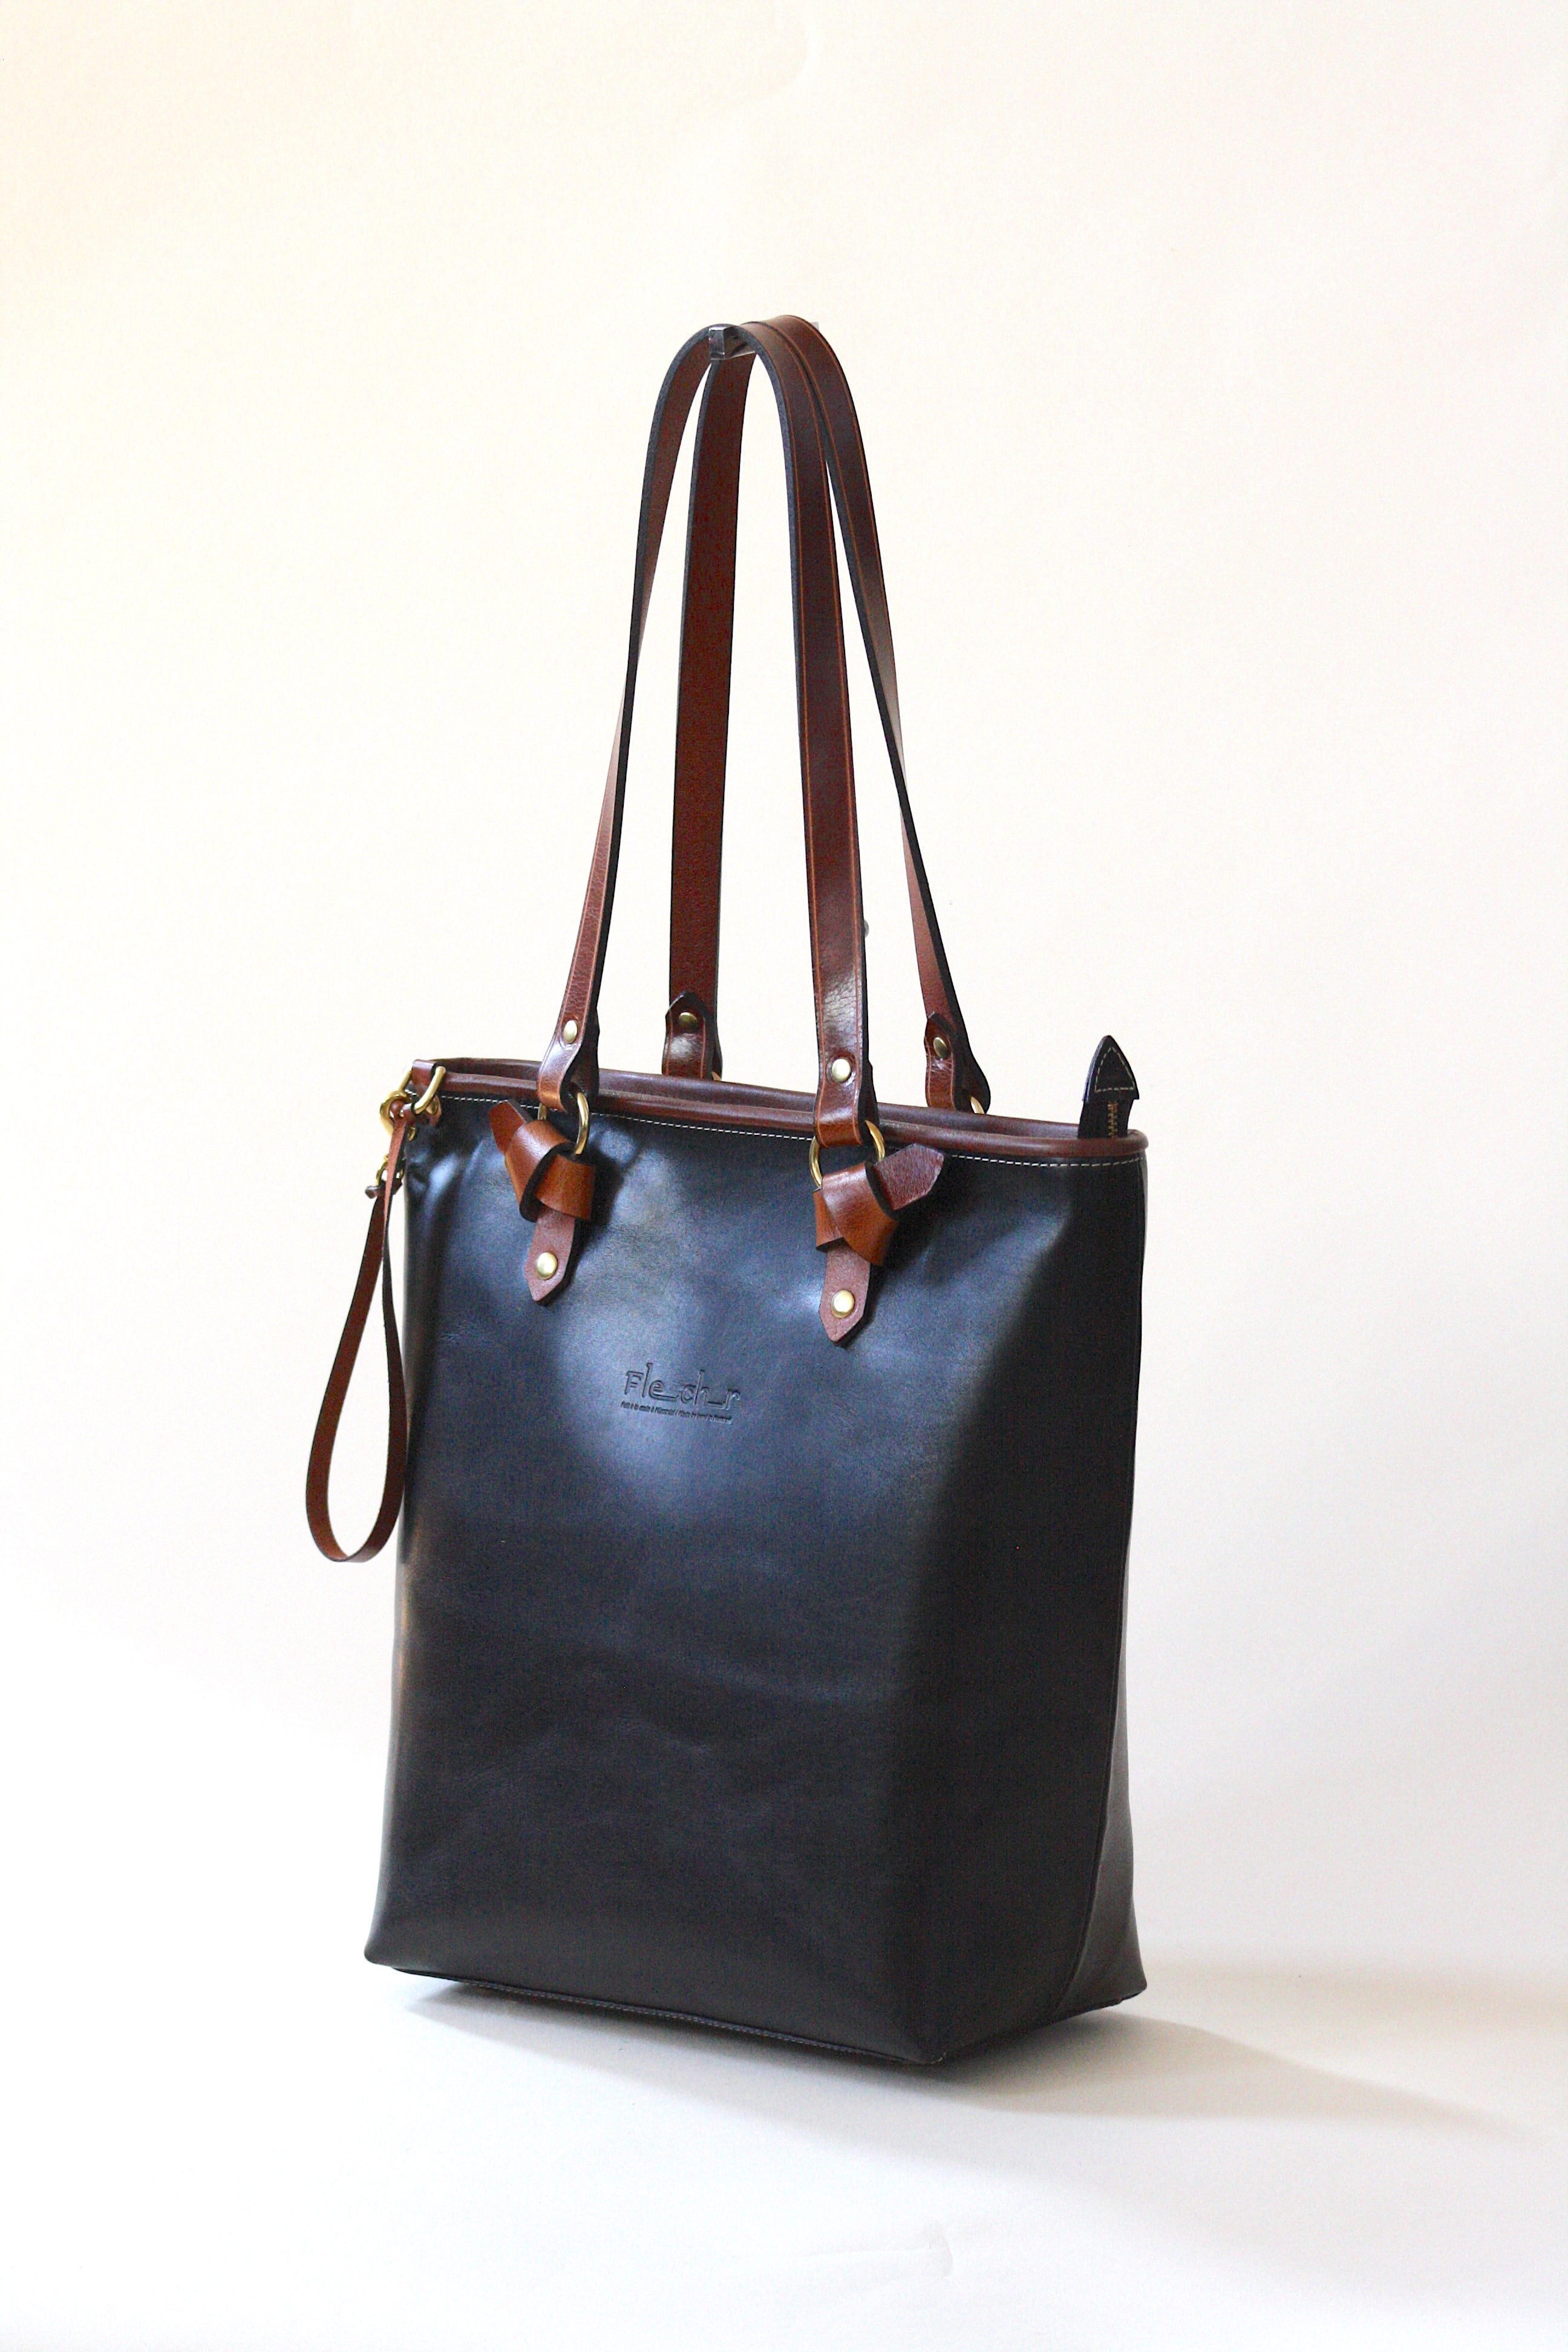 Signature leather Bag Designer handmade by Kim Fletcher in Montreal canada Qc